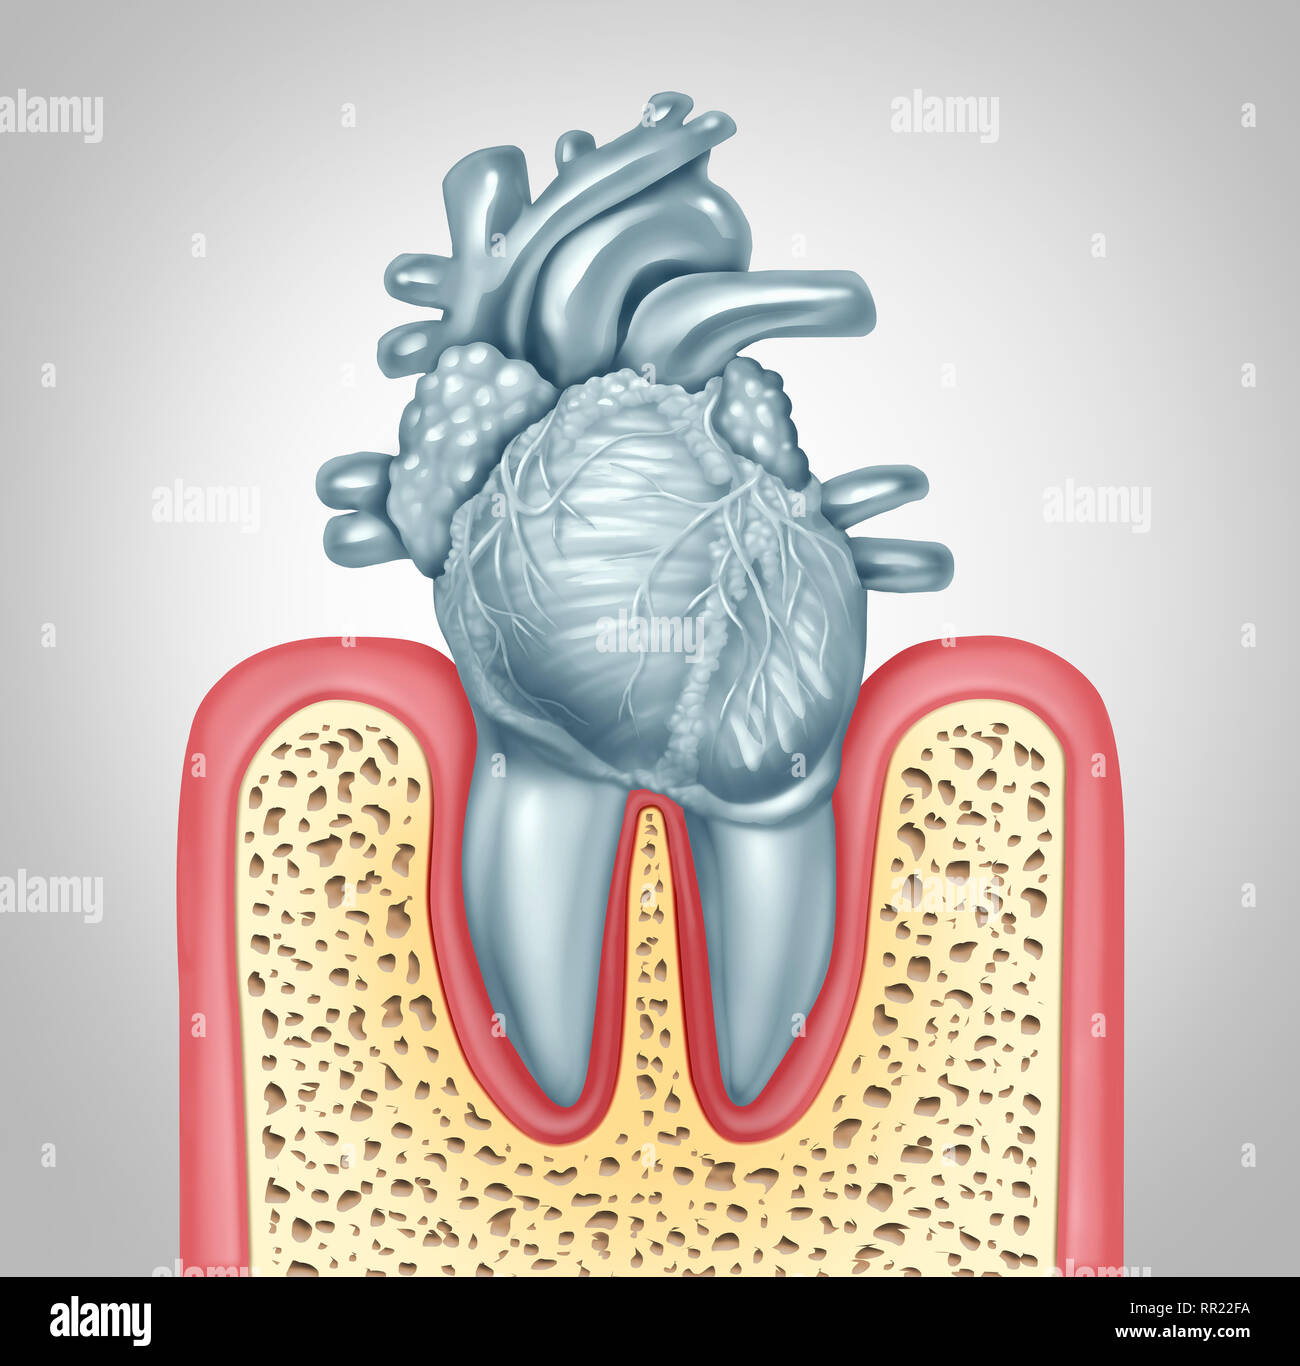 Dental care or oral health and heart disease hygiene concept caused by tooth plaque and gum infection due to mouth bacteria damaging the valves. Stock Photo